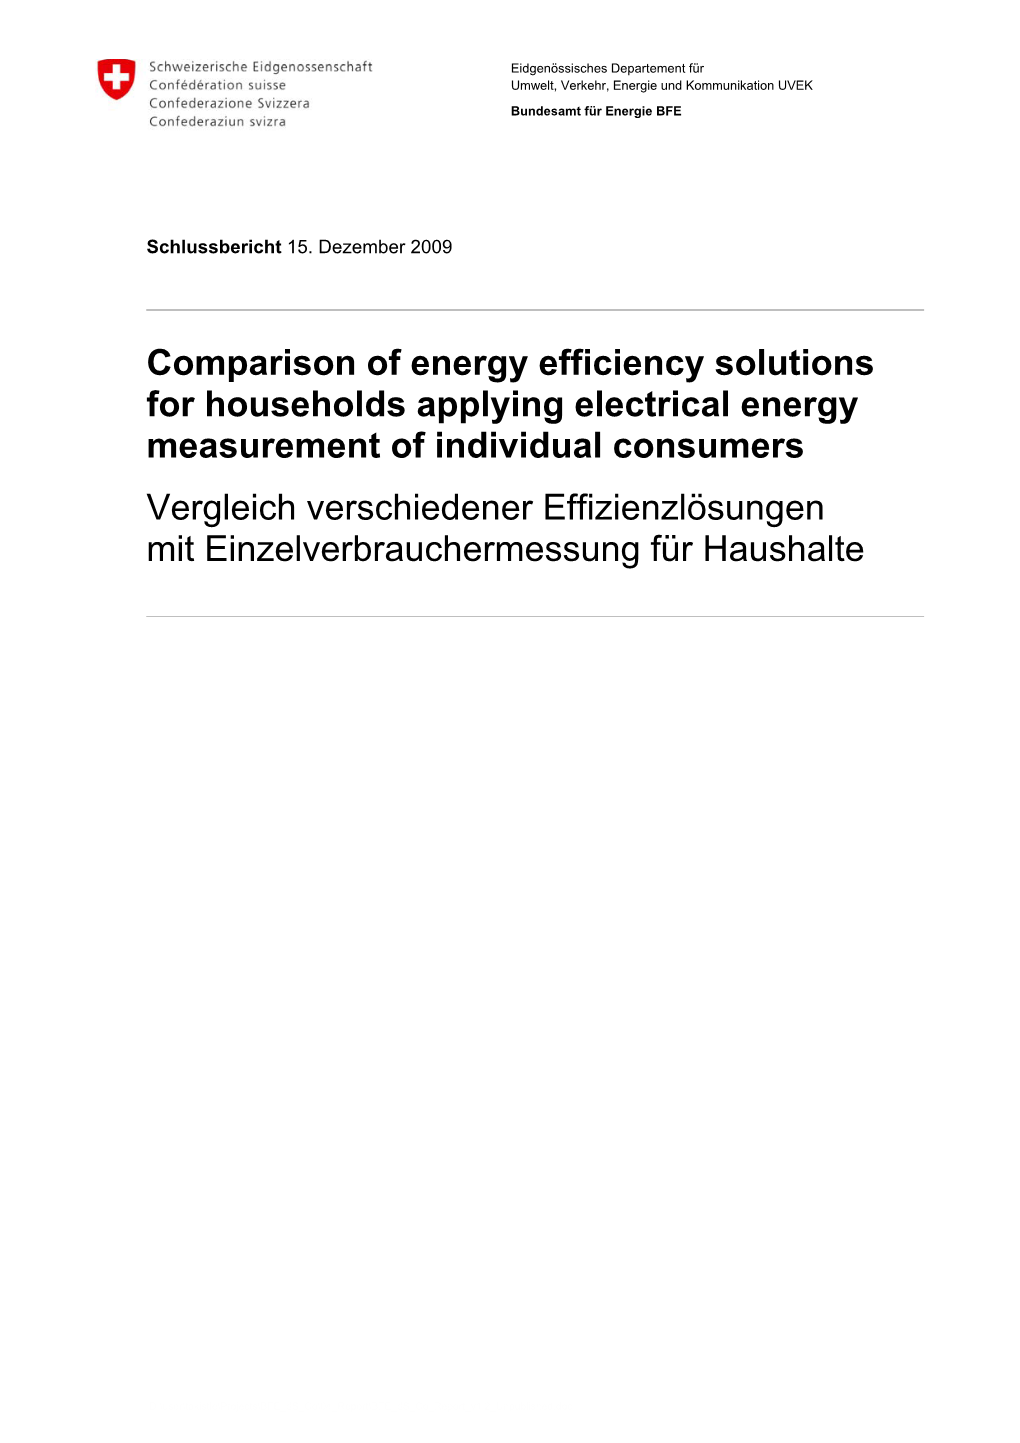 Comparison of Energy Efficiency Solutions for Households Applying Electrical Energy Measurement of Individual Consumers